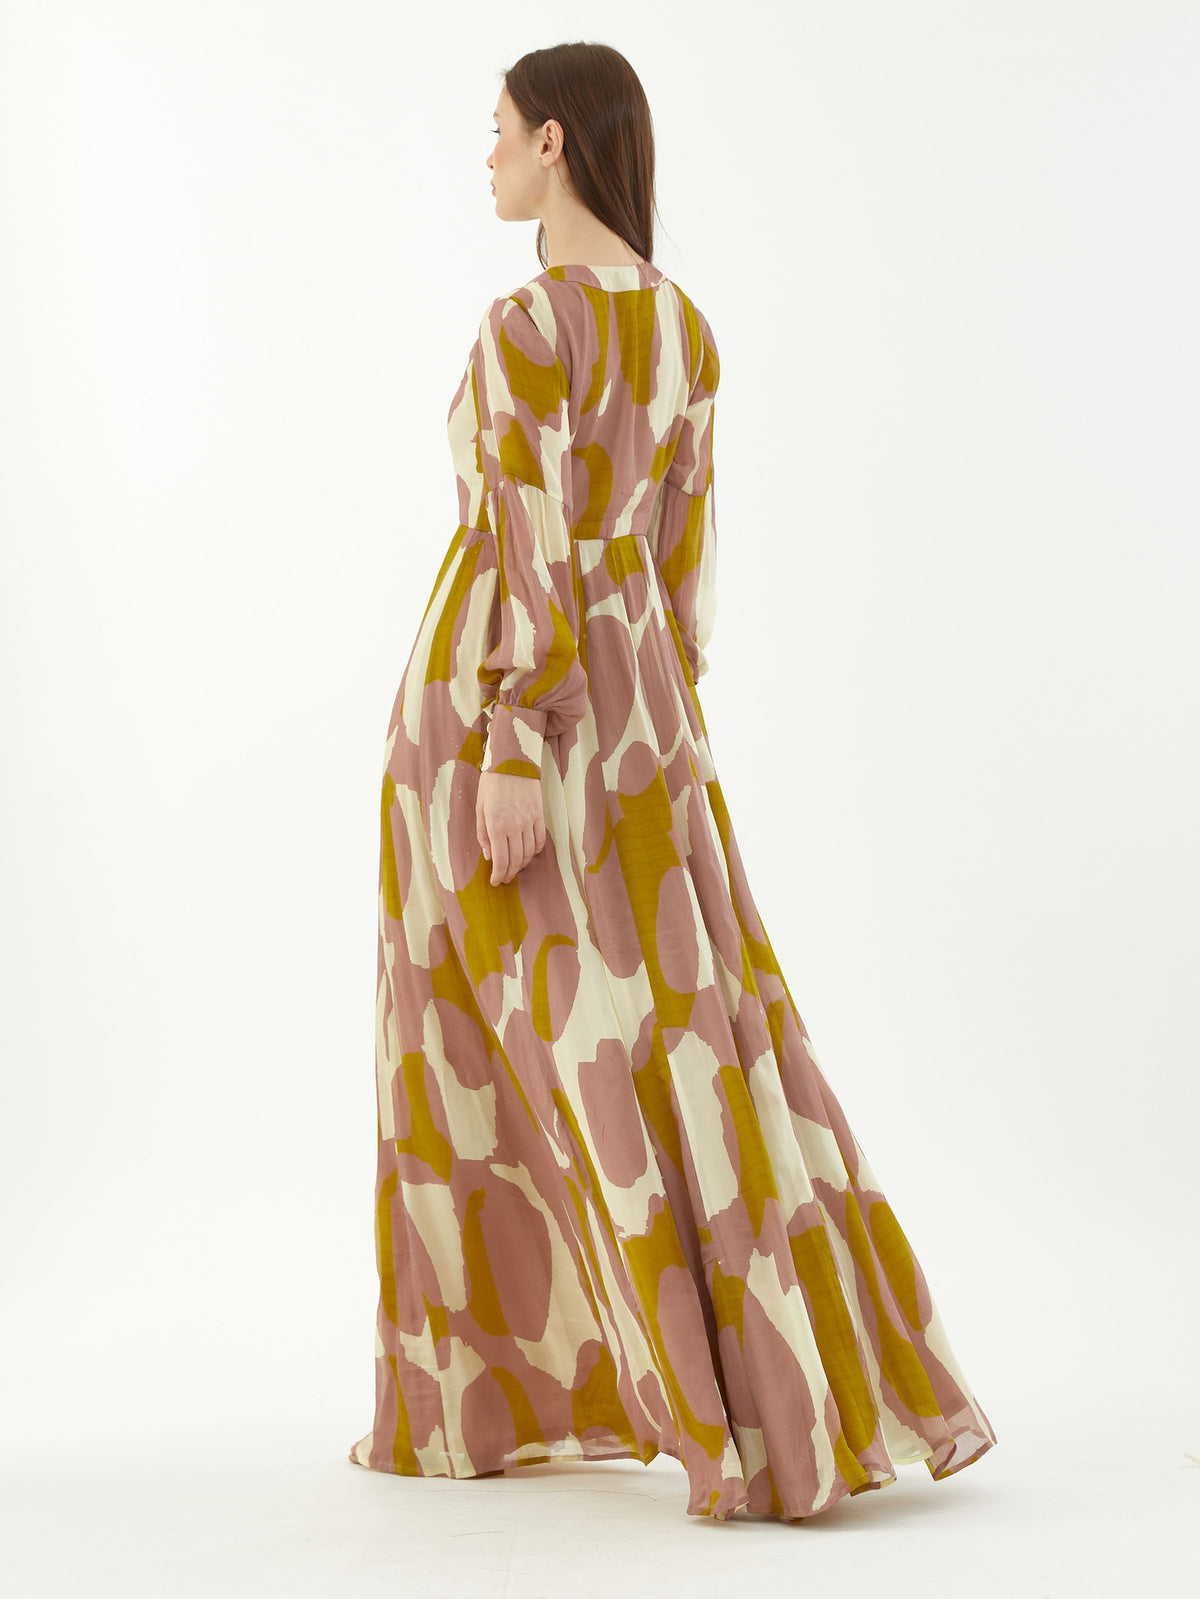 PEACH, MUSTARD AND OFFWHITE FRONT OPEN ABSTRACT DRESS